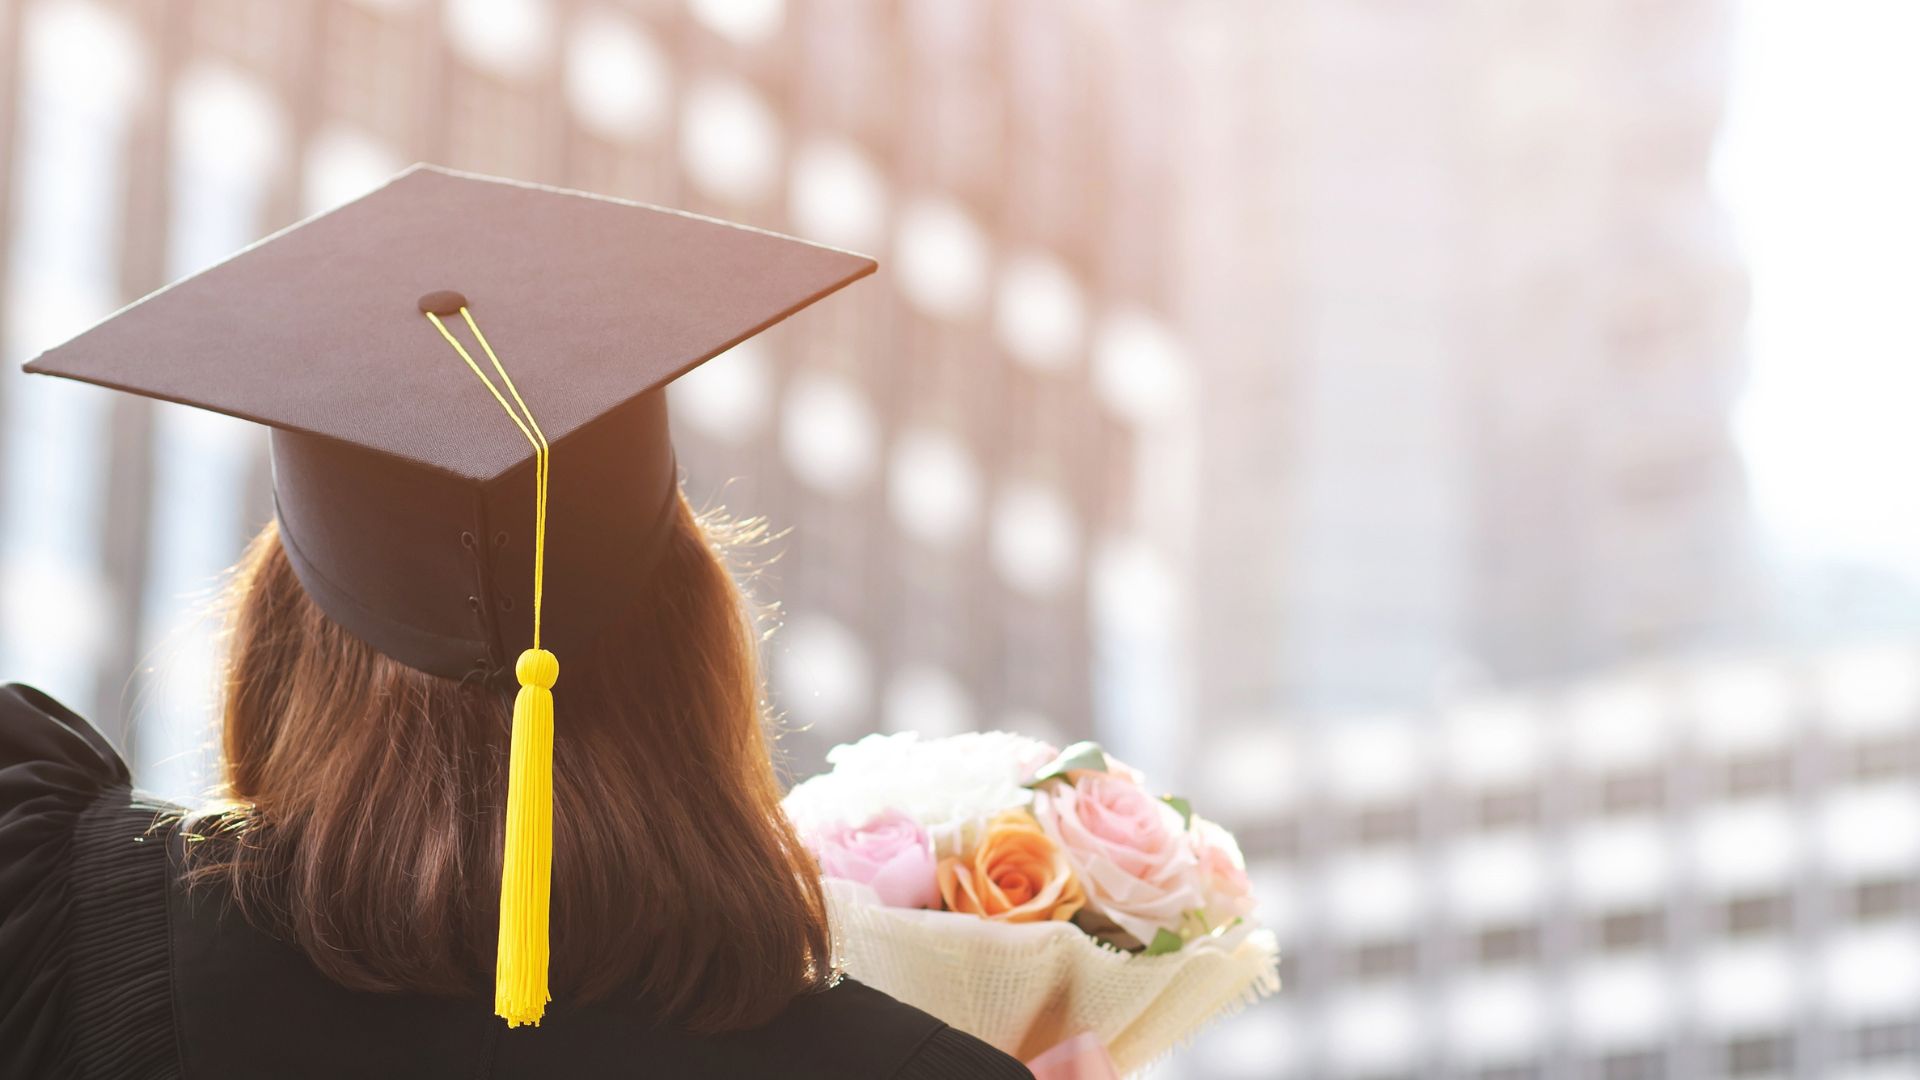 A Bachelor's Degree Might Be the Better Option